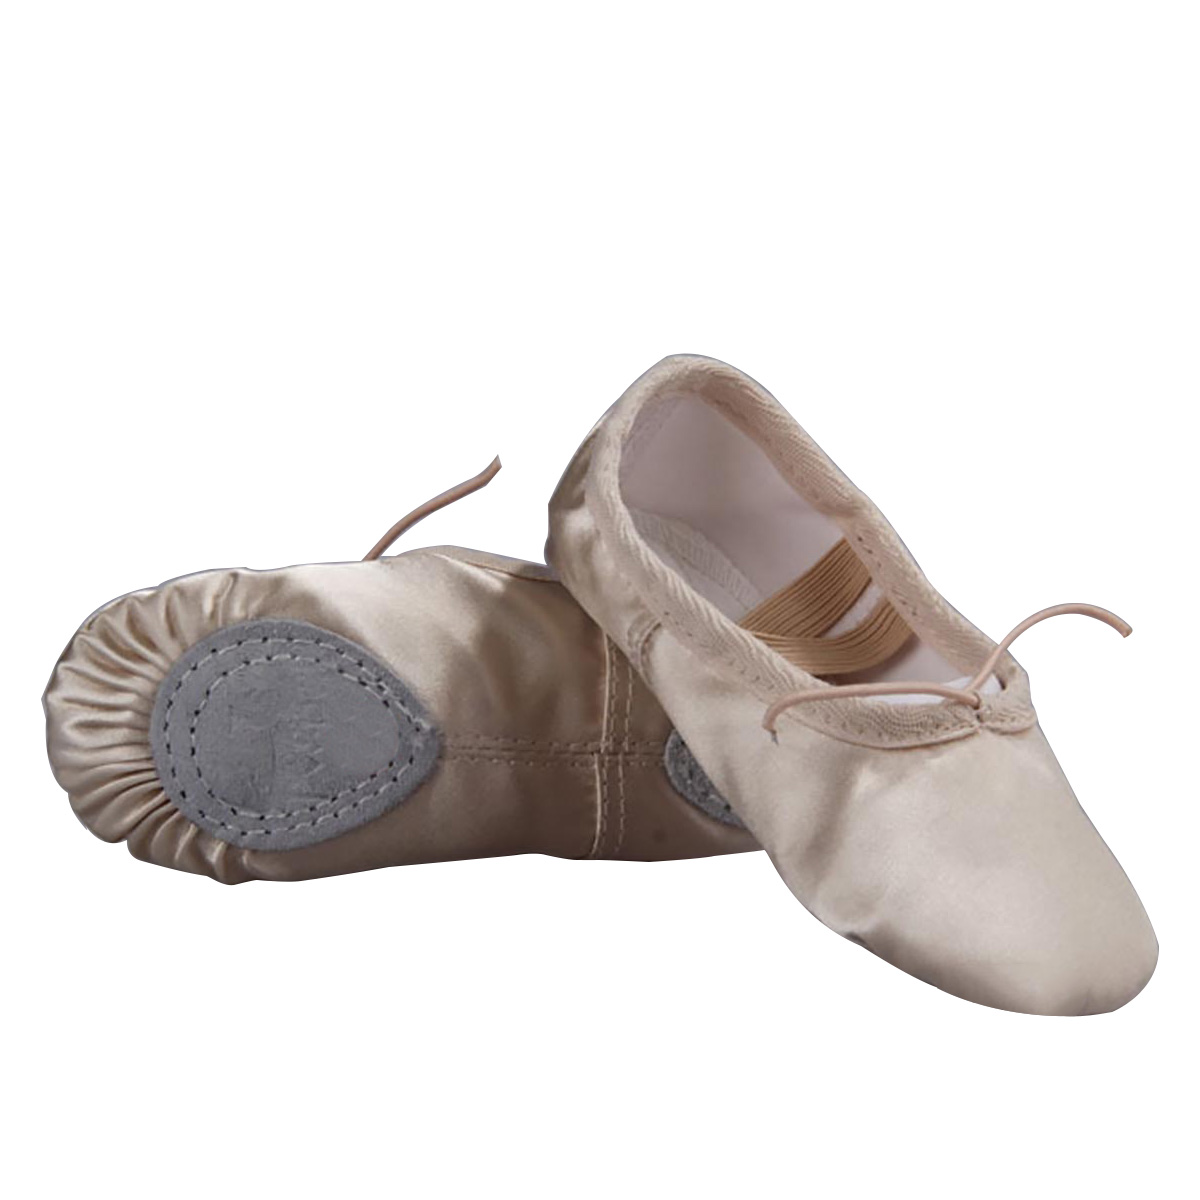 HAWEE Ballet Shoes, Satin Ballet Slippers Flats Professional Performa Dance Shoe for Girls Ballet Yoga Practice Dance Shoes - image 1 of 6